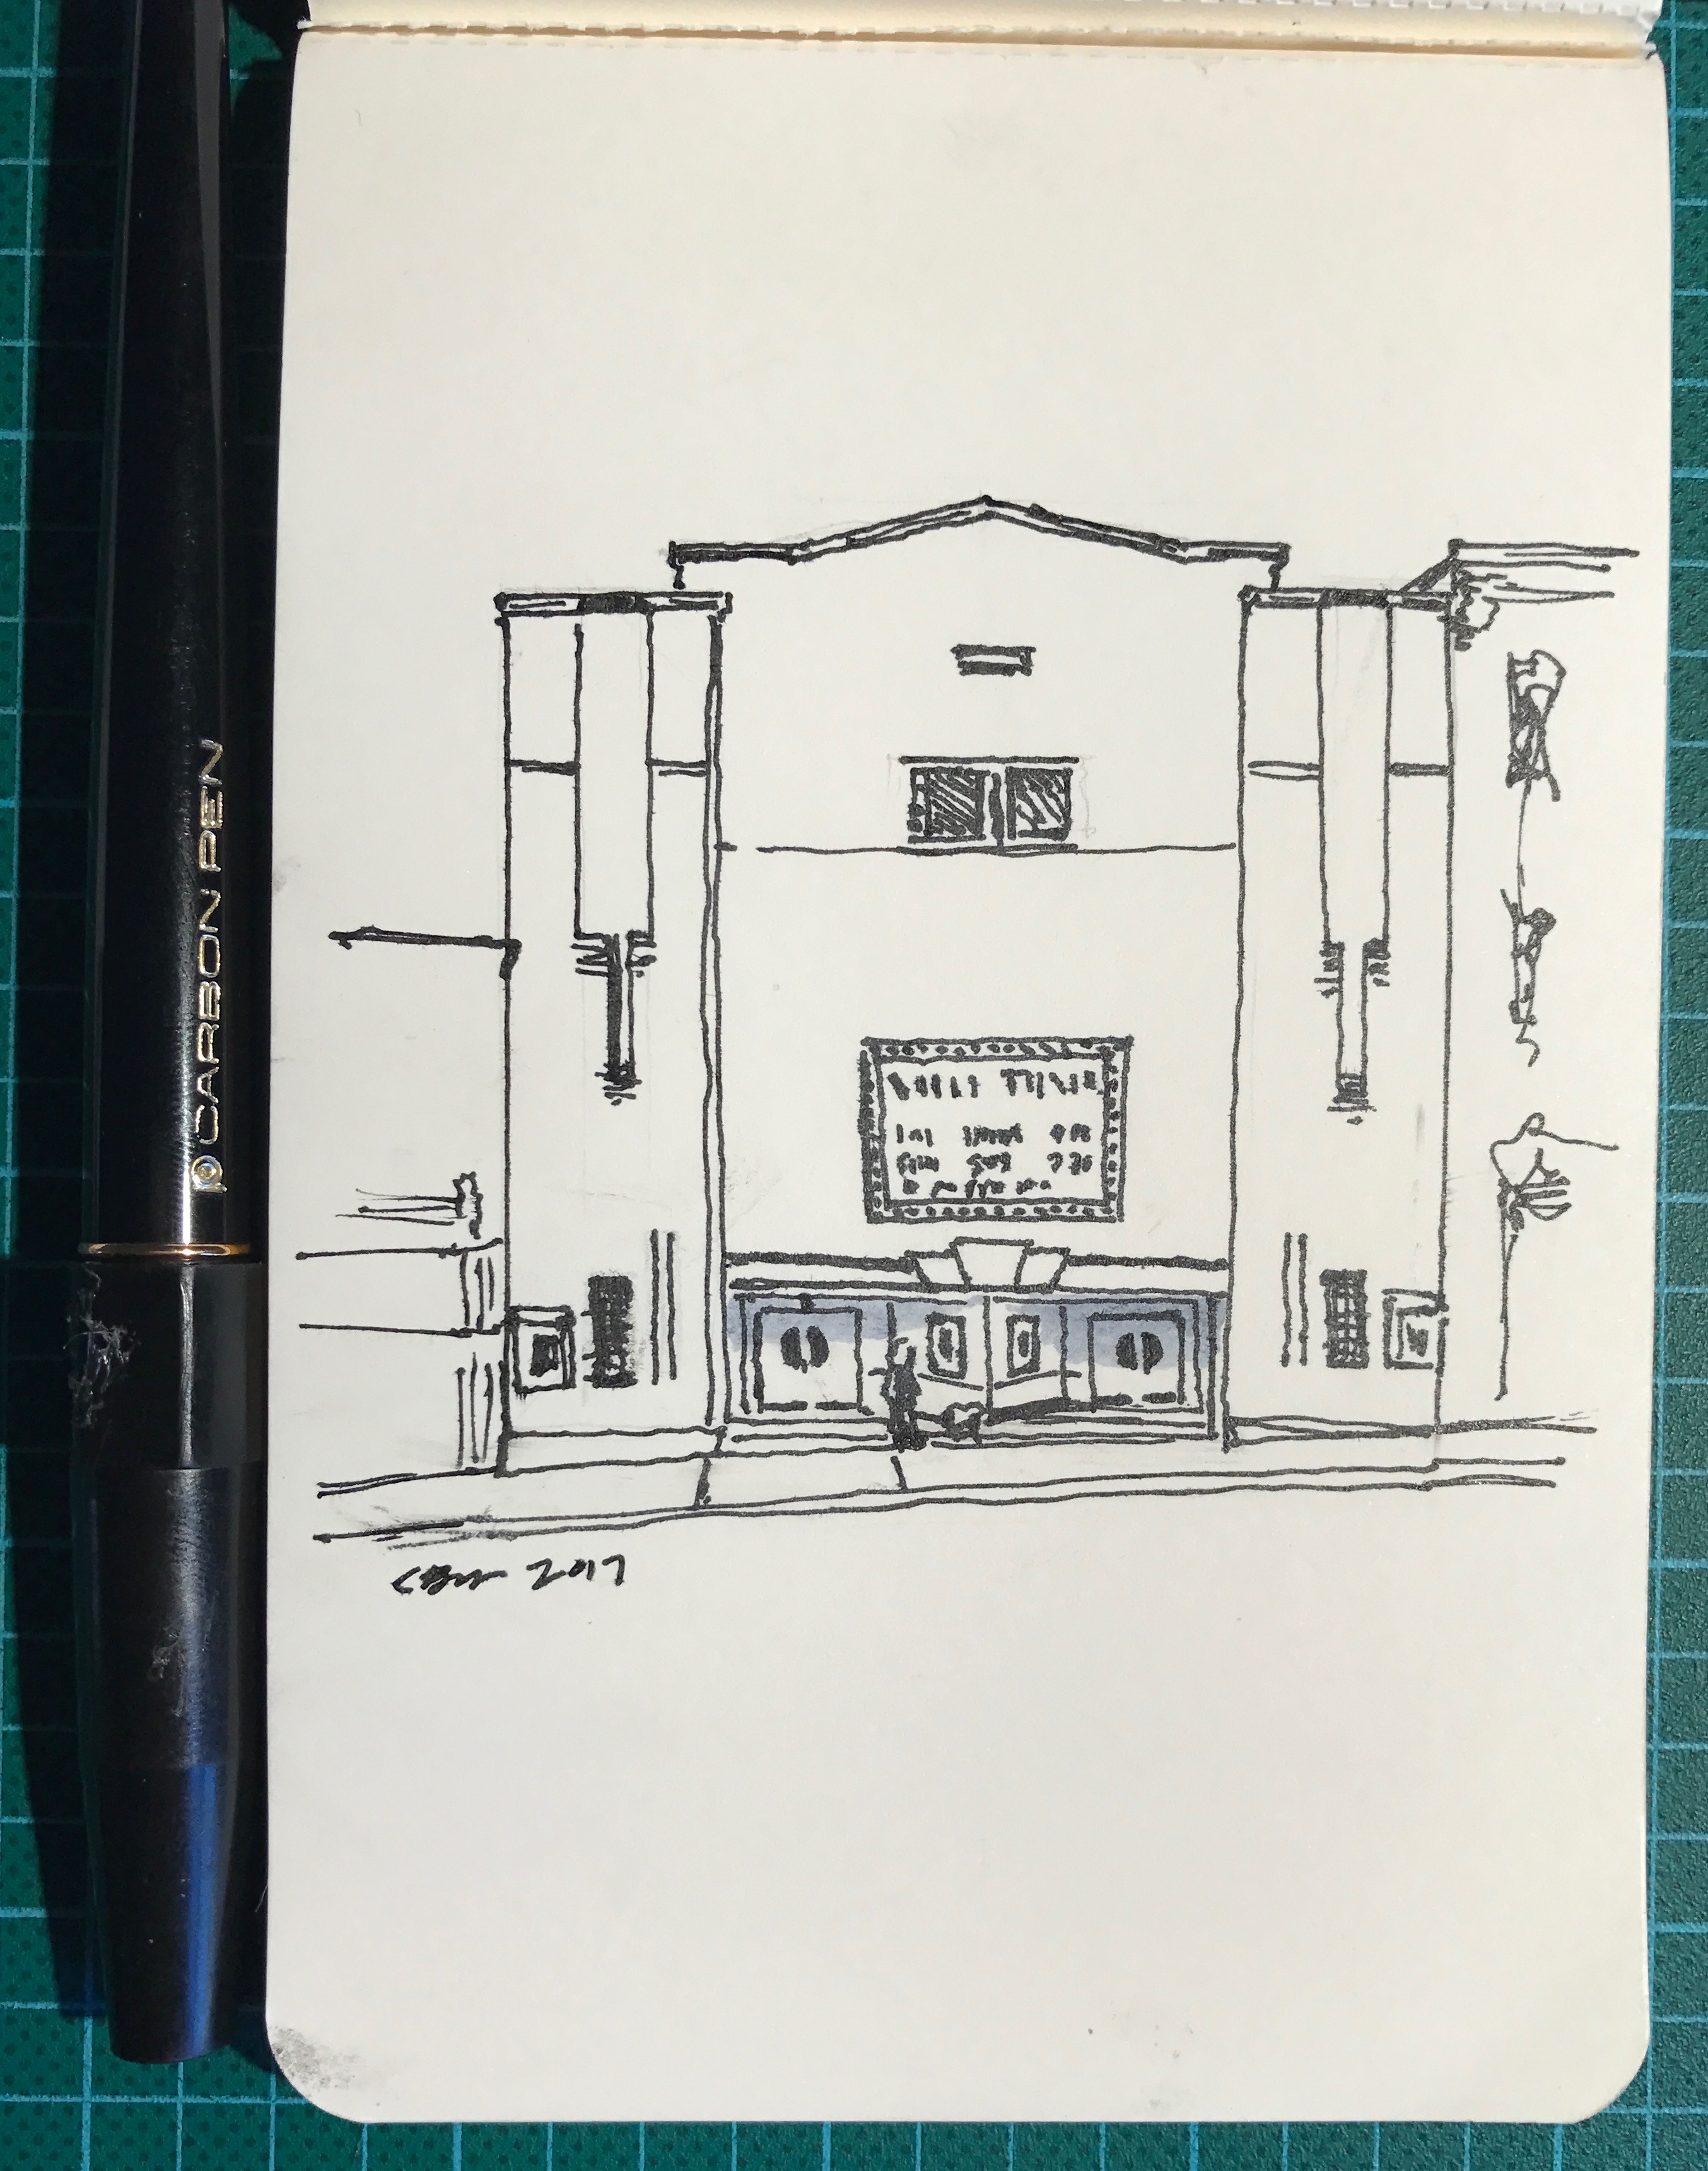 Pen-and-ink drawing of The Vogue Cinema